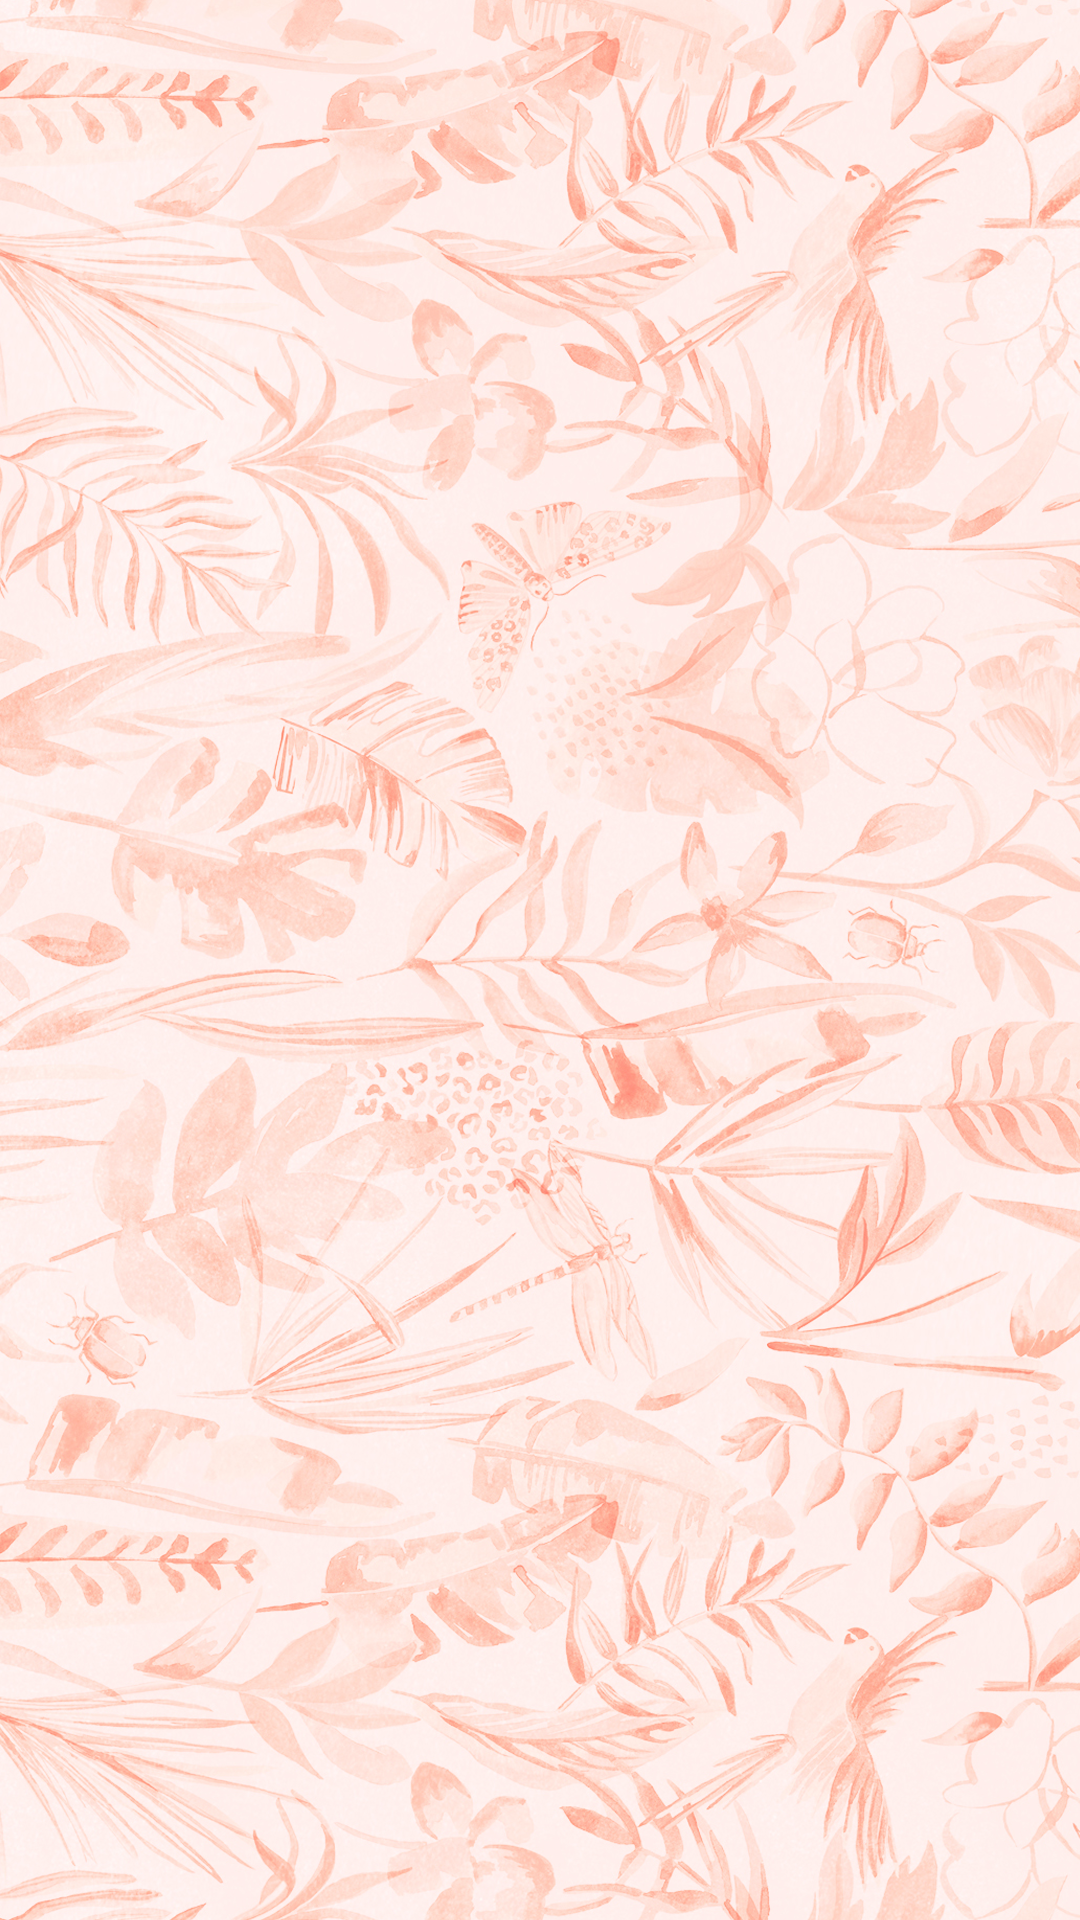 Blush Pink Floral Wallpaper For Your Mobile Cell Phone, Tablet Or